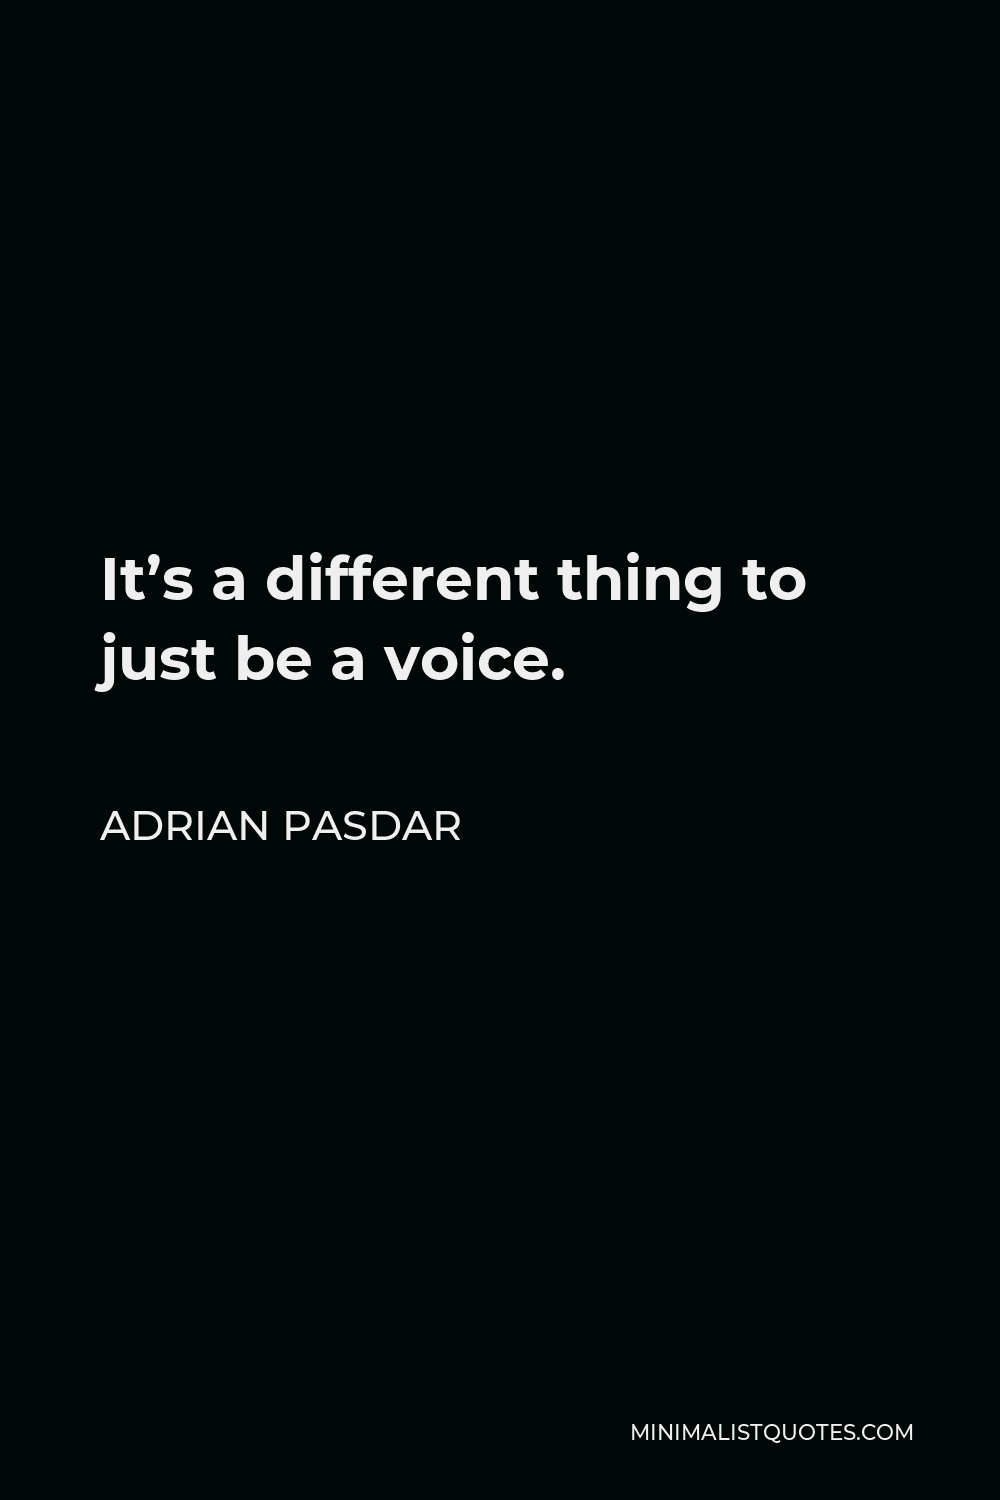 Adrian Pasdar Quote - It’s a different thing to just be a voice.